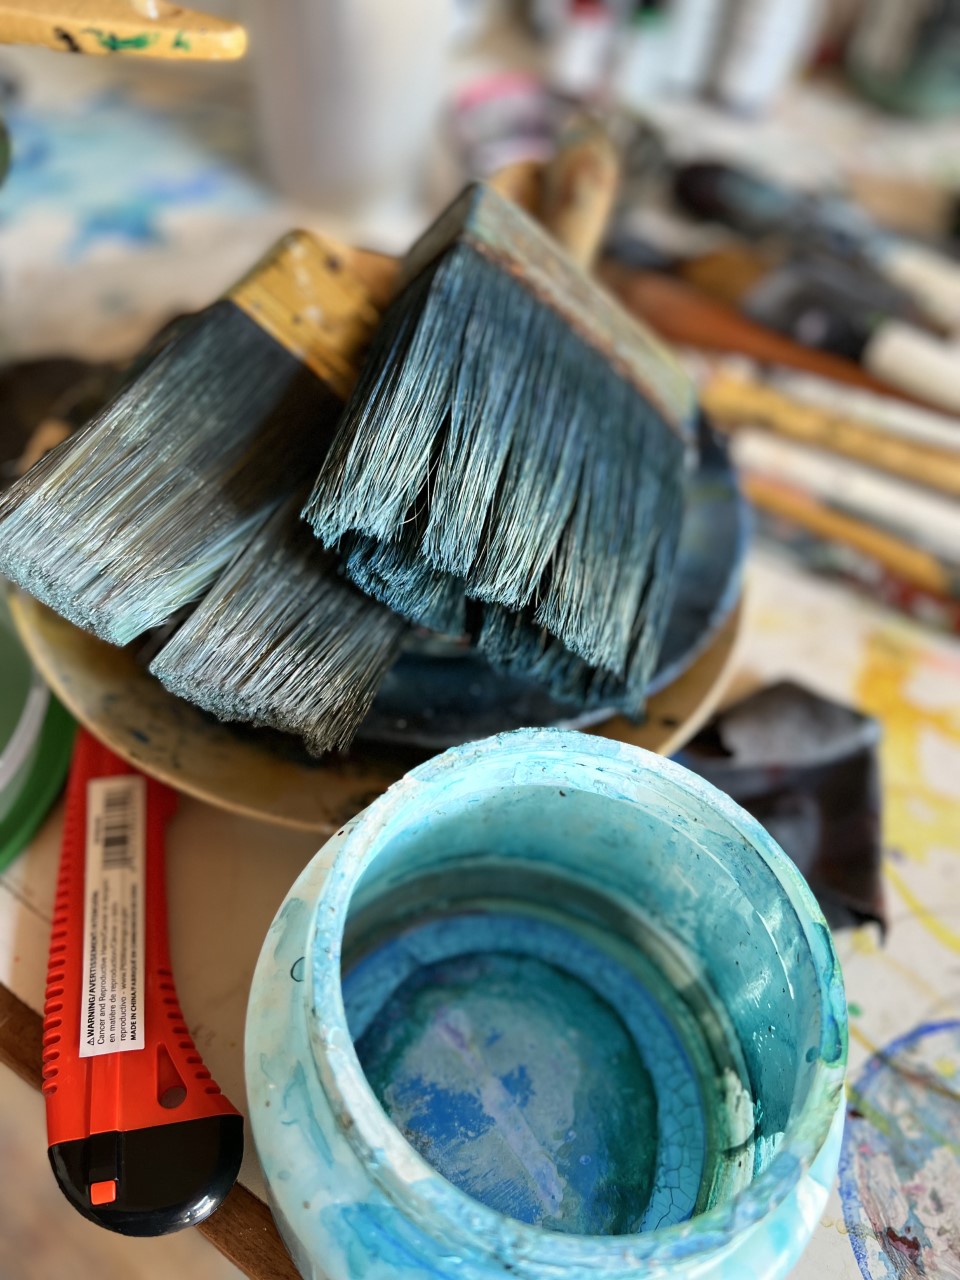 paintbrushes with blue paint on them